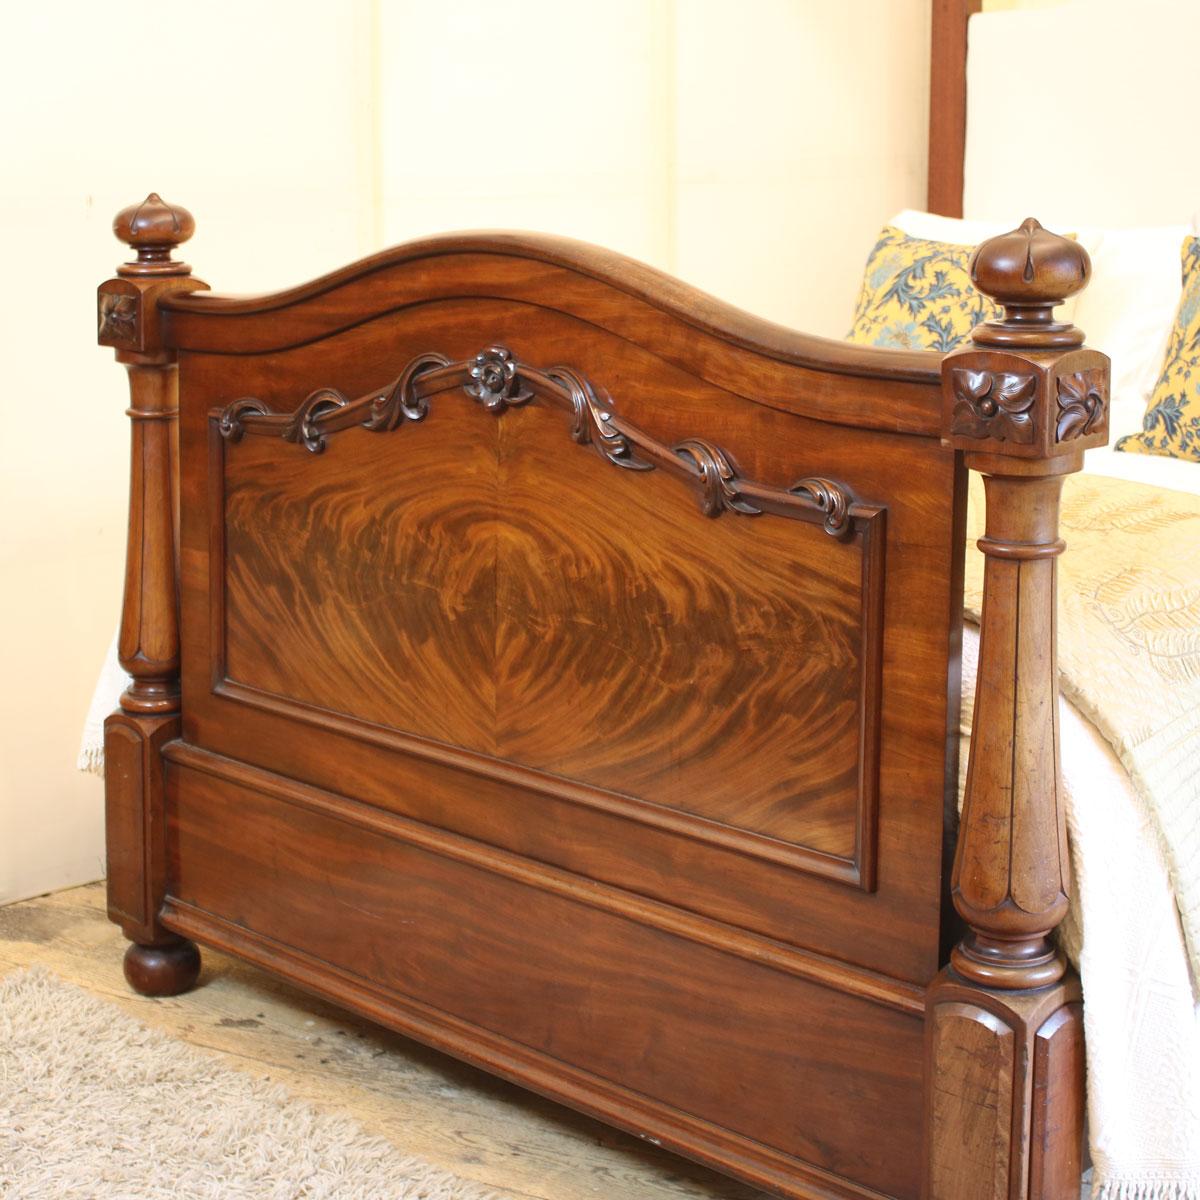 A magnificent mahogany Victorian half tester bed with flame veneer in the shaped foot panel, substantial turned front posts and tall arched canopy.
The upholstered back panel, with serpentine shape to mirror the foot panel, can be covered in a